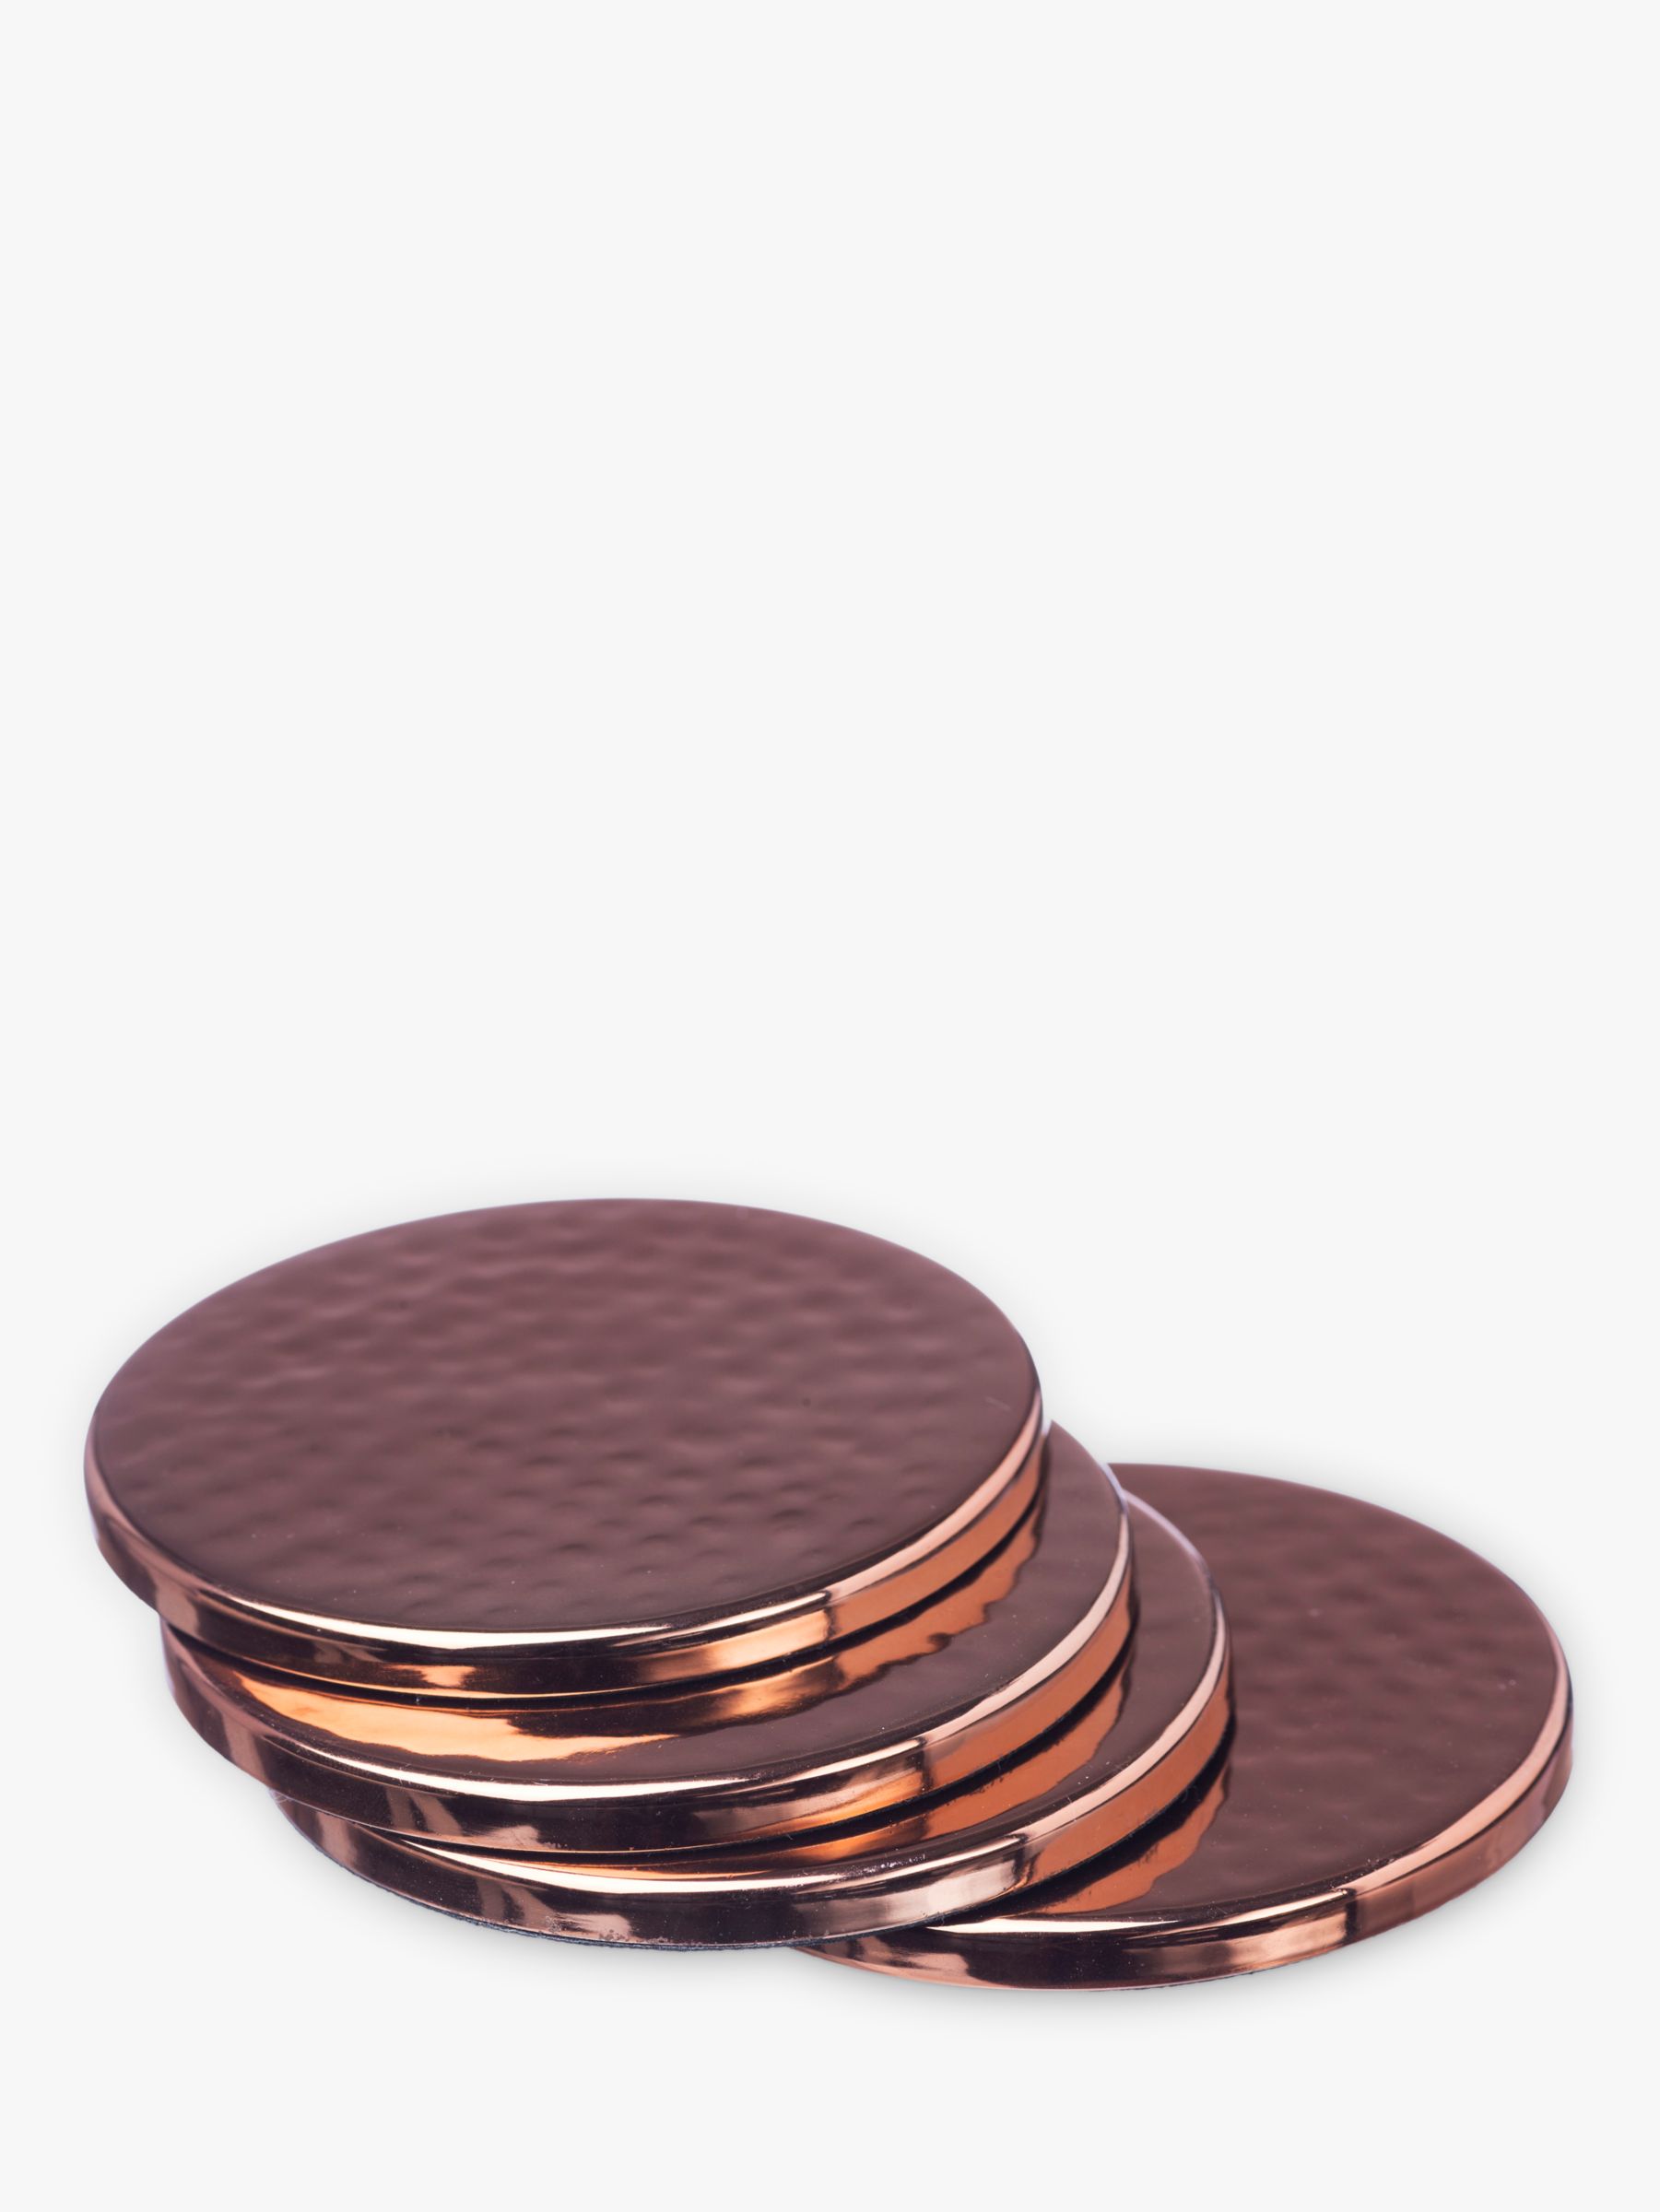 Just Slate Copper Coasters, Set of 4 at John Lewis & Partners